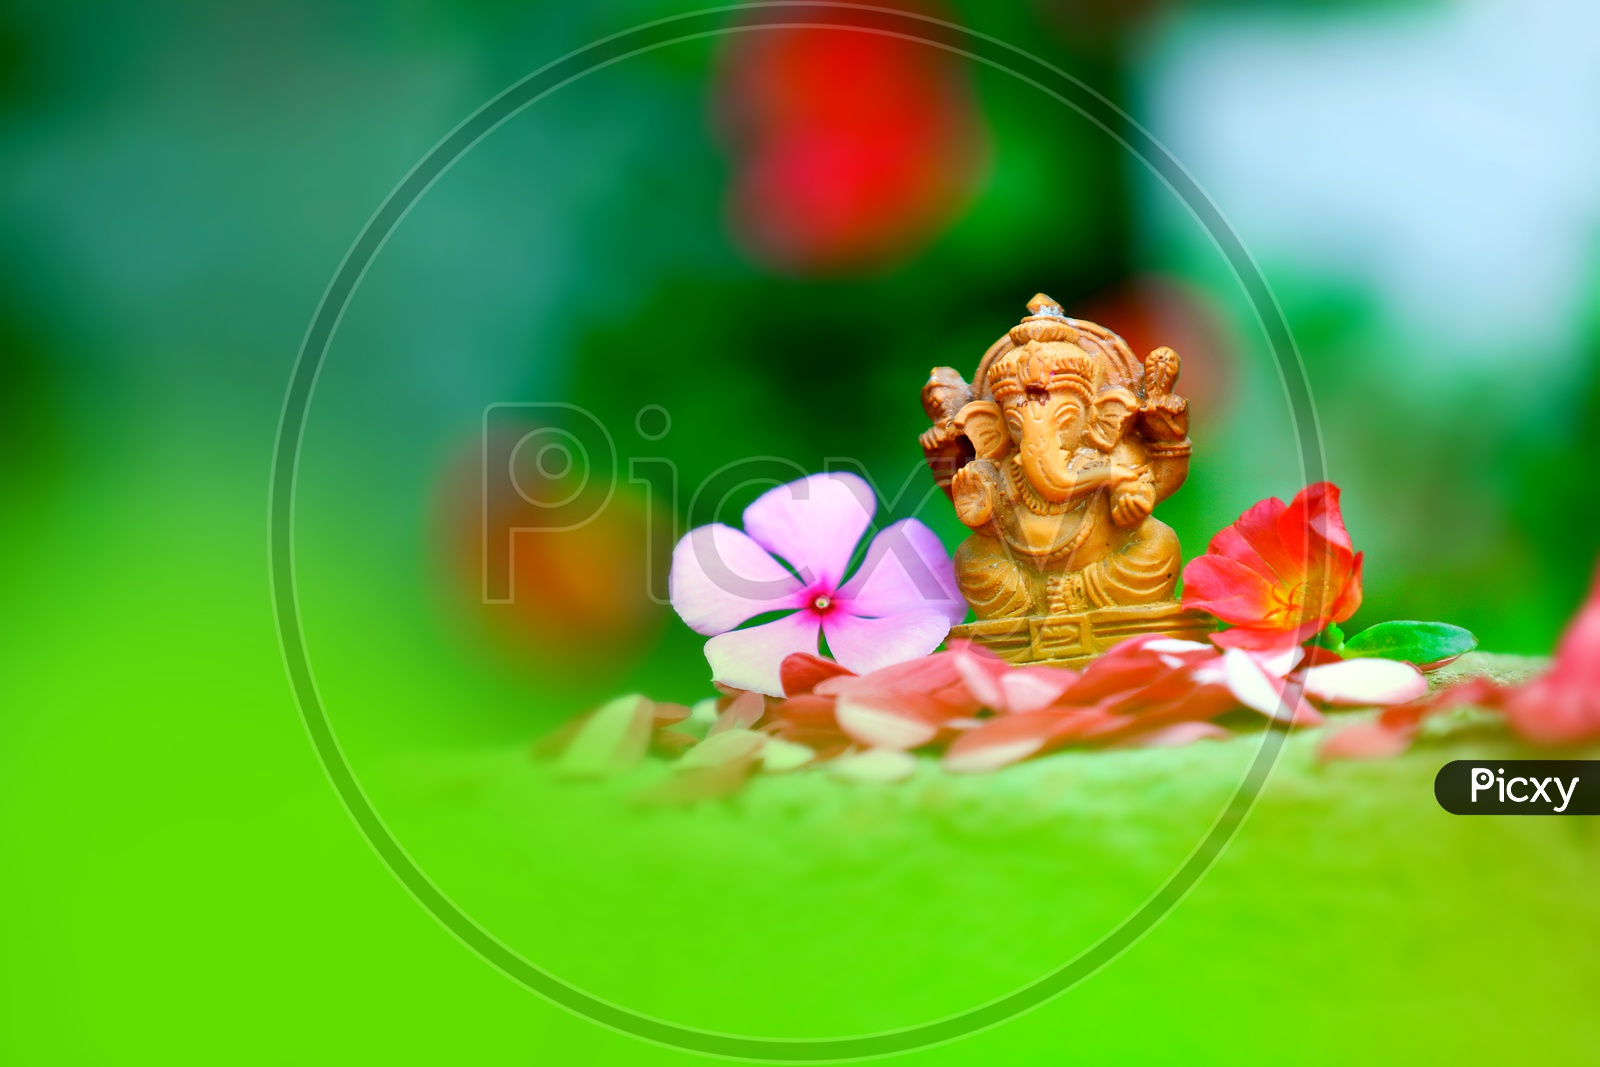 Lord Ganesh Idol  with  beautiful flowers in the foreground and greenery in the background